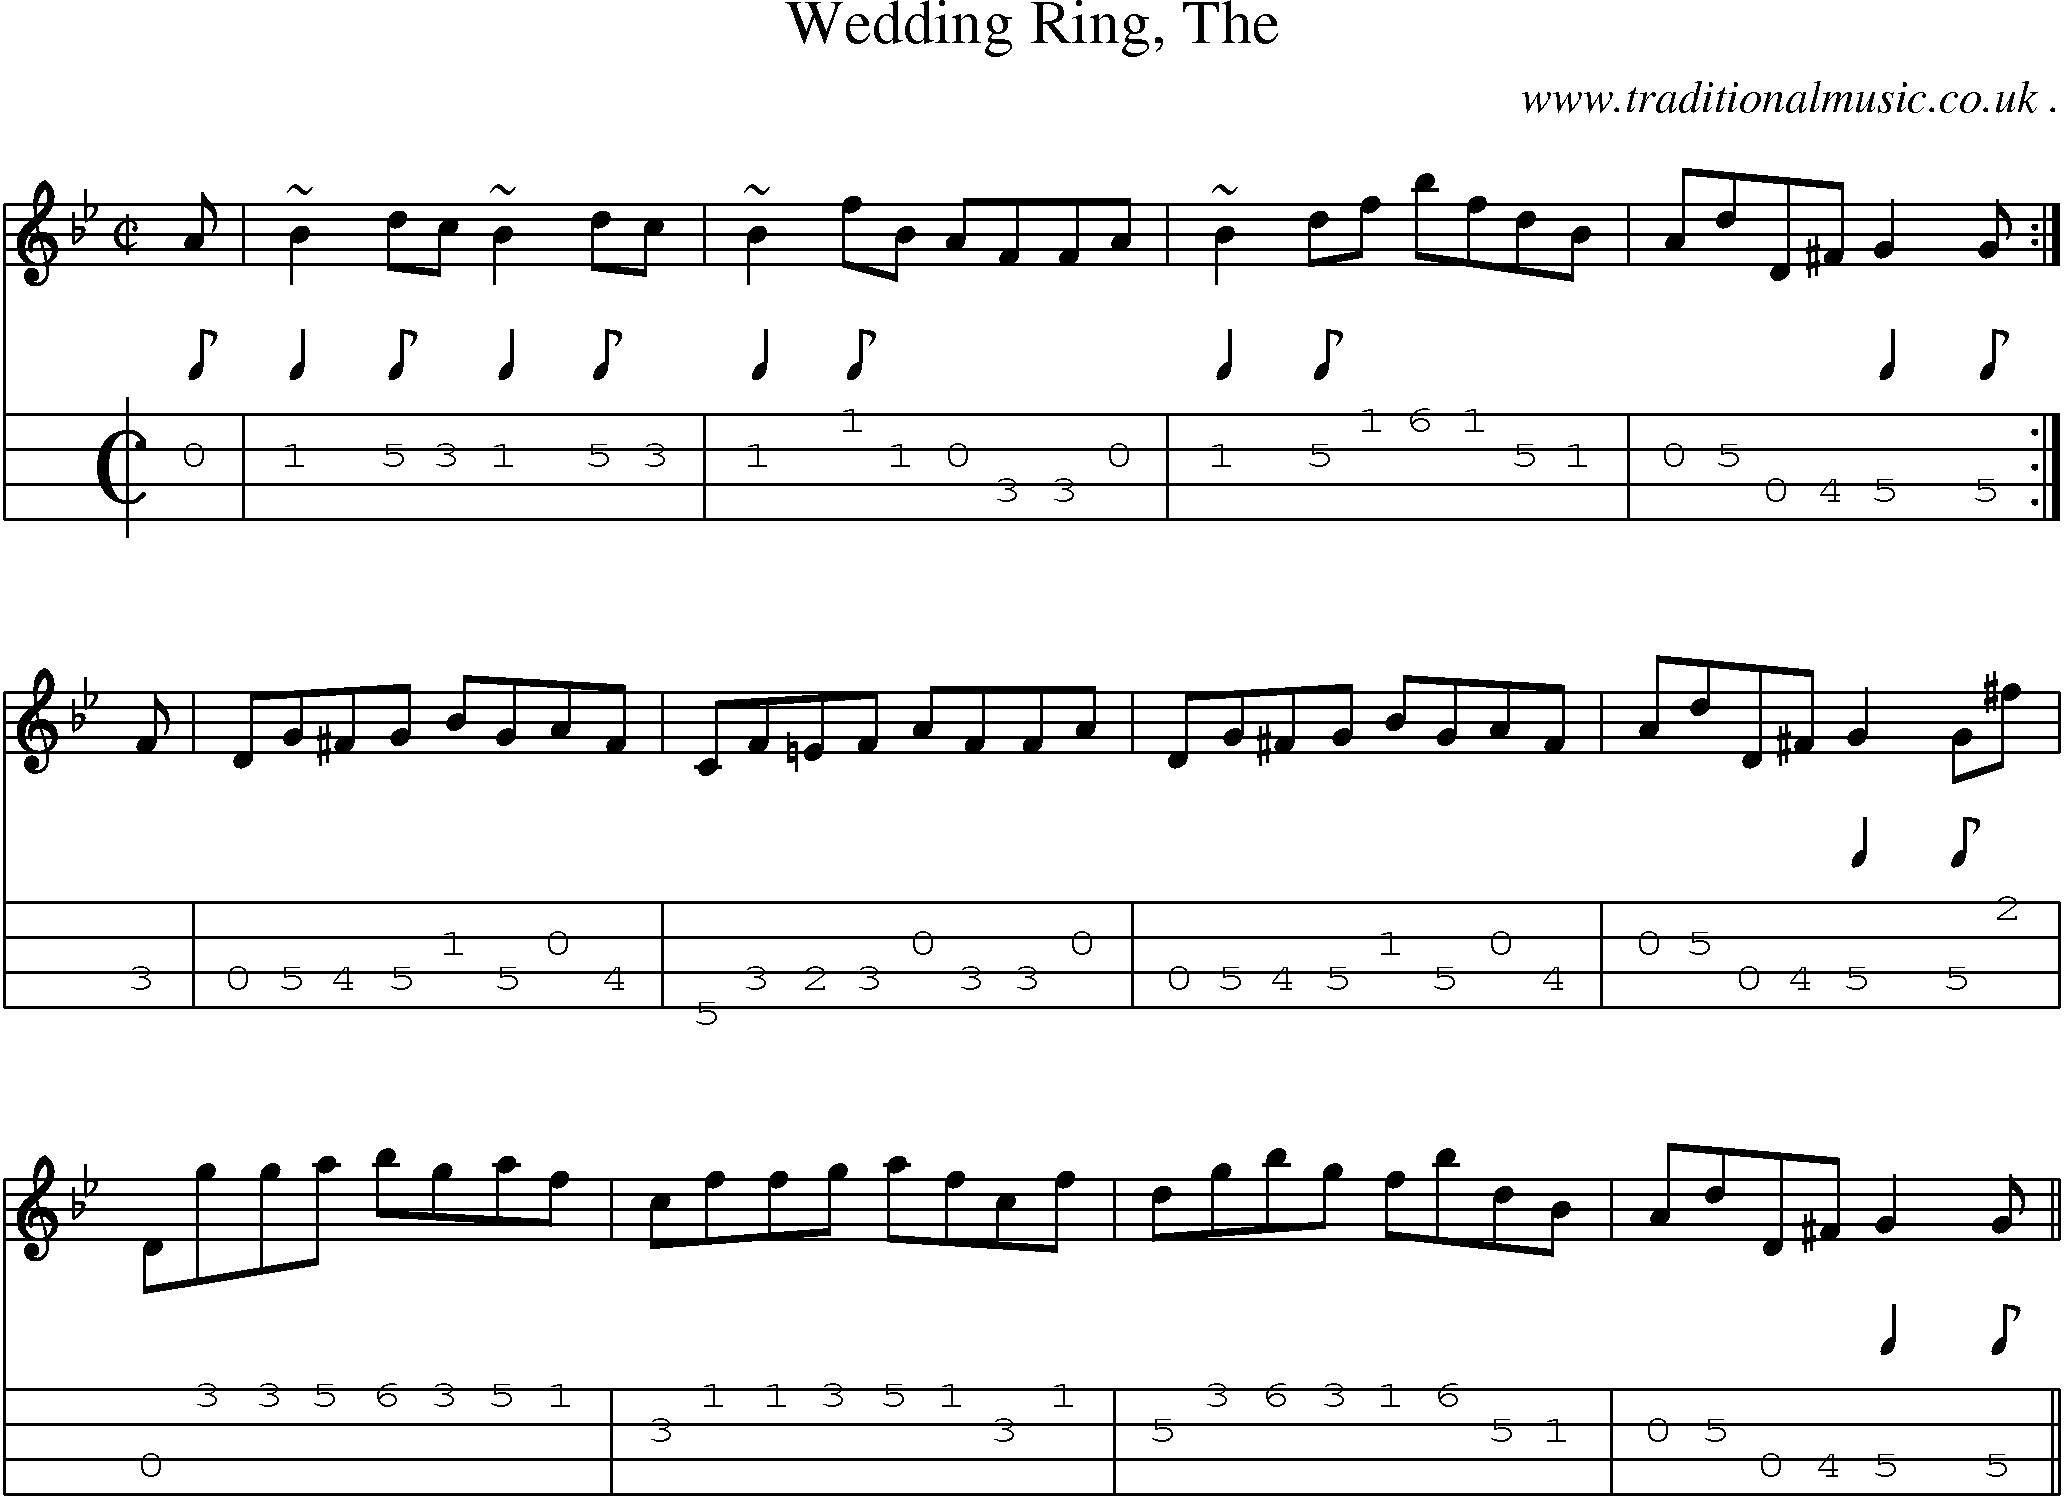 Sheet-music  score, Chords and Mandolin Tabs for Wedding Ring The